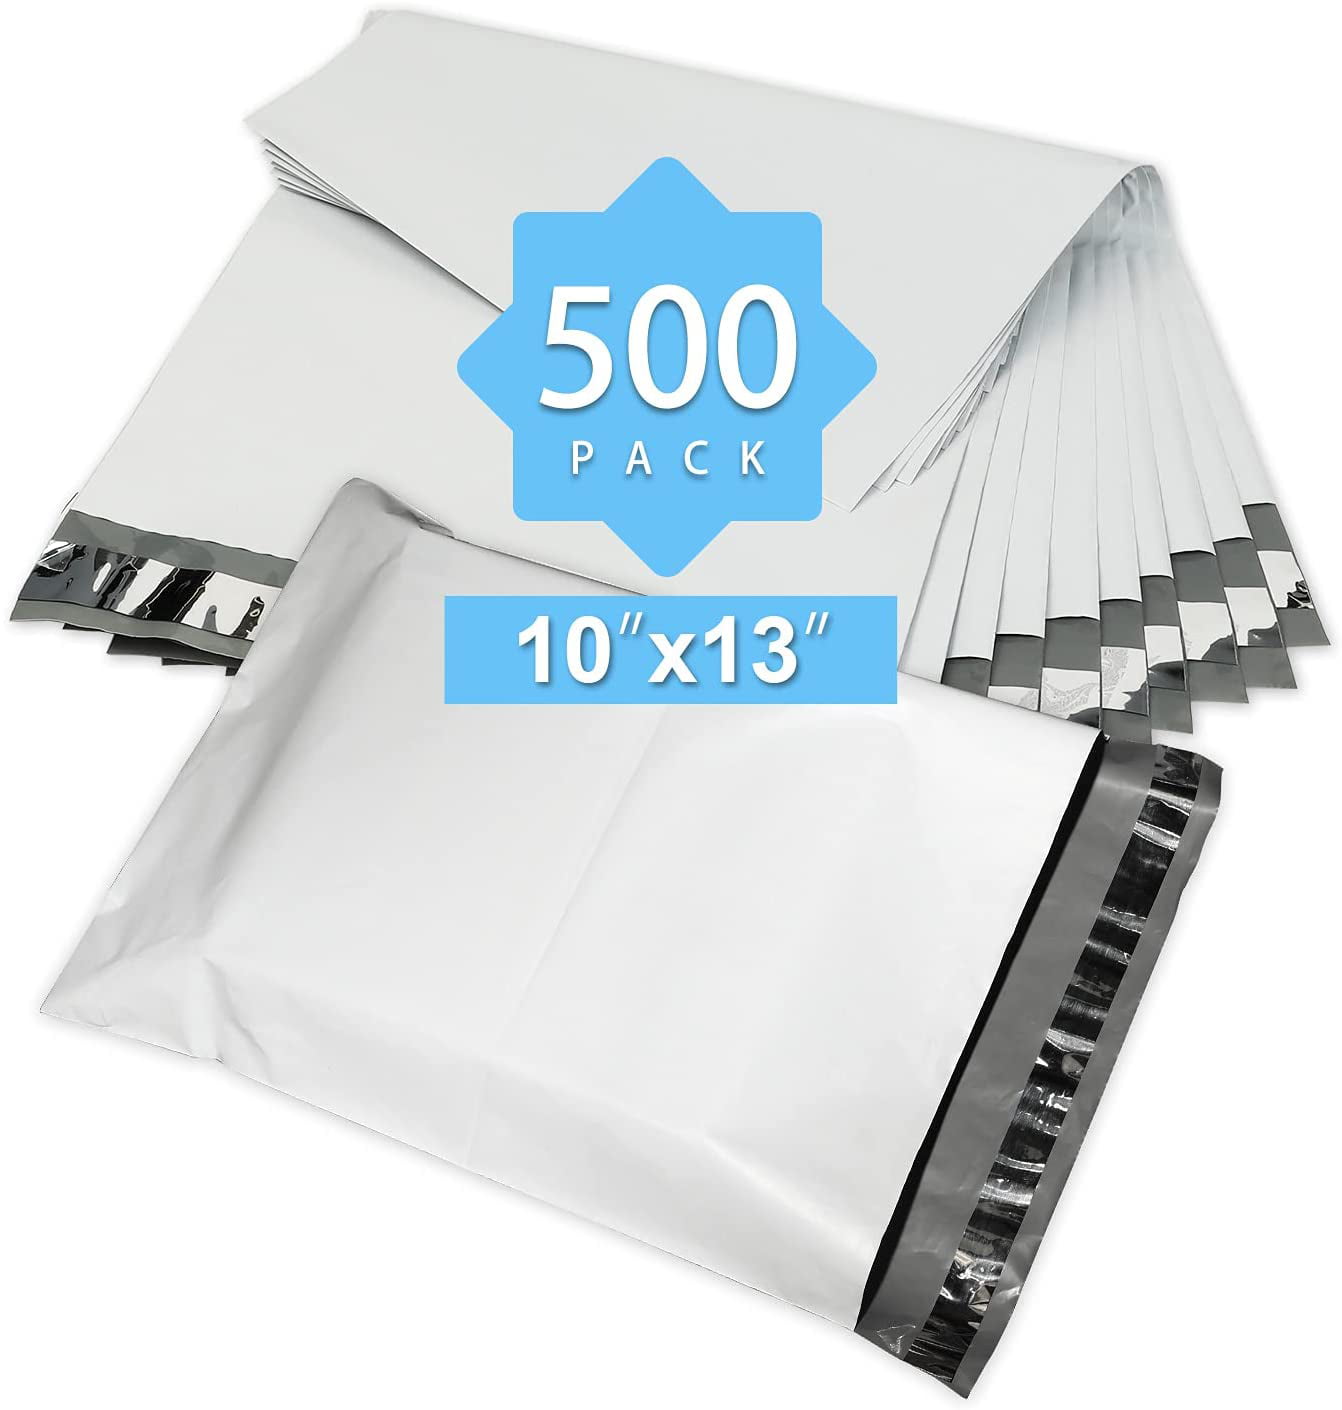 5 units of size 24x24 and 10 units of 10x13 inch Poly Mailer Shipping set 